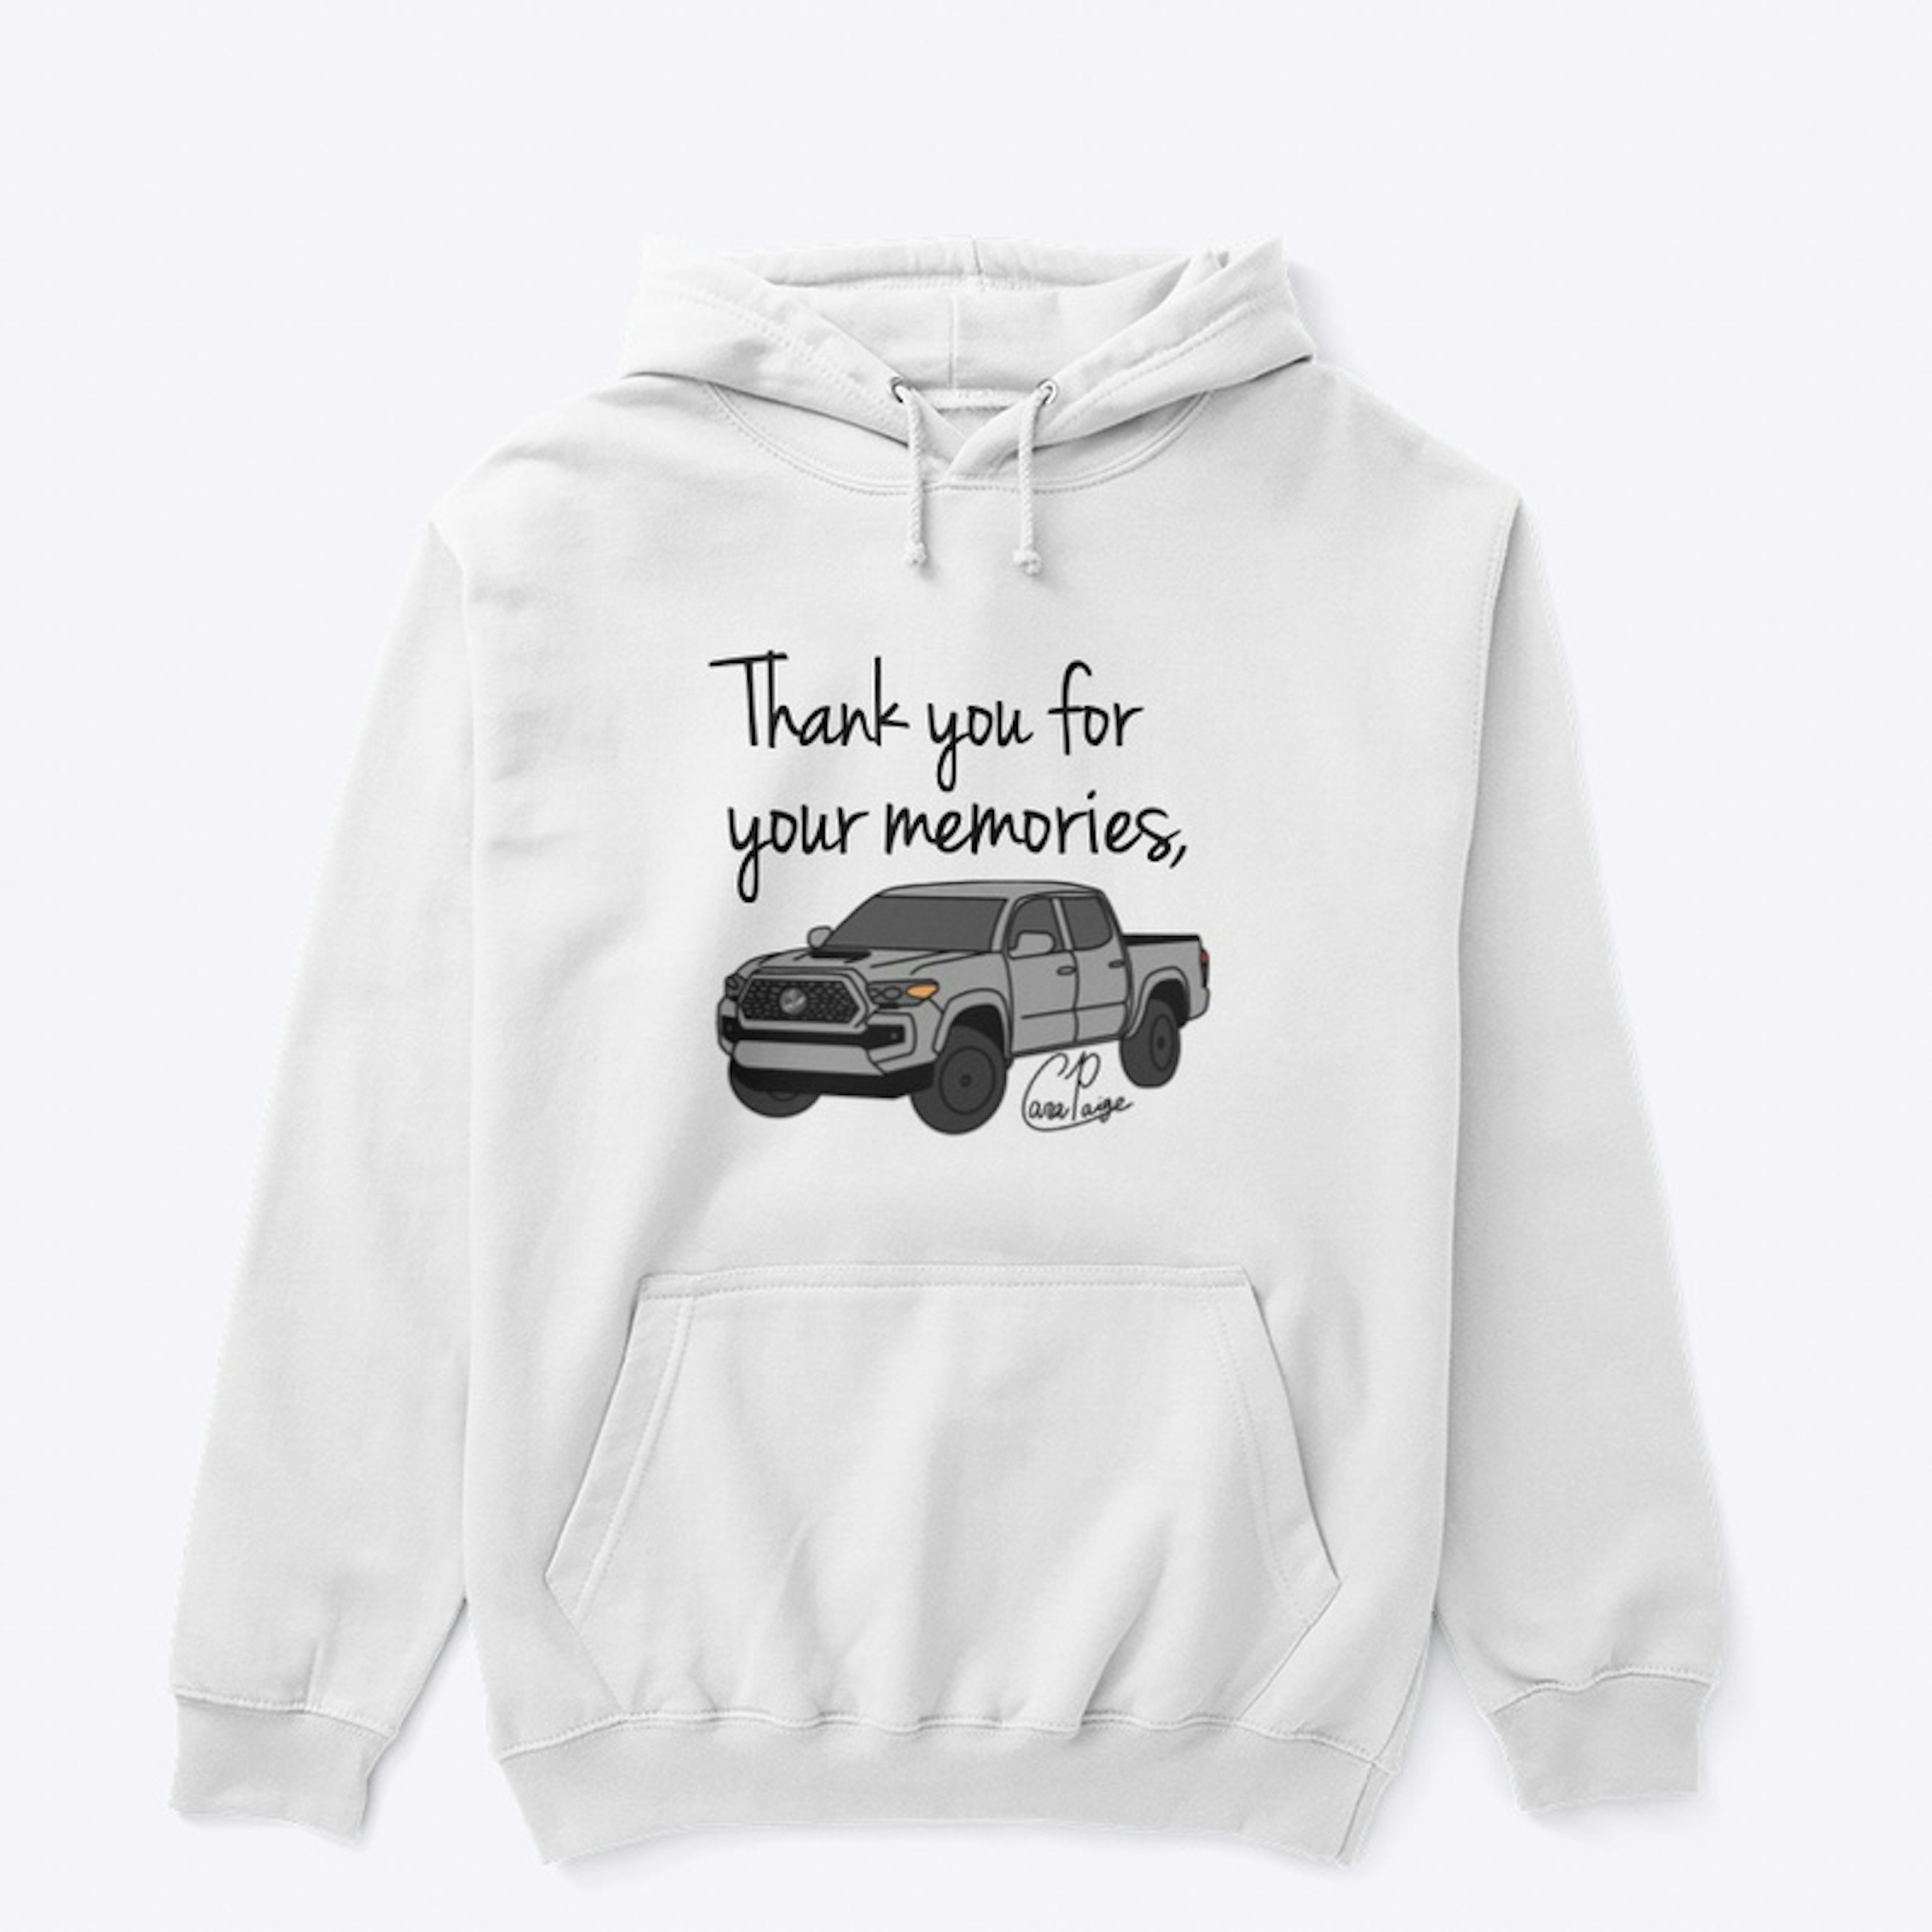 "Thank you for your memories" Tee